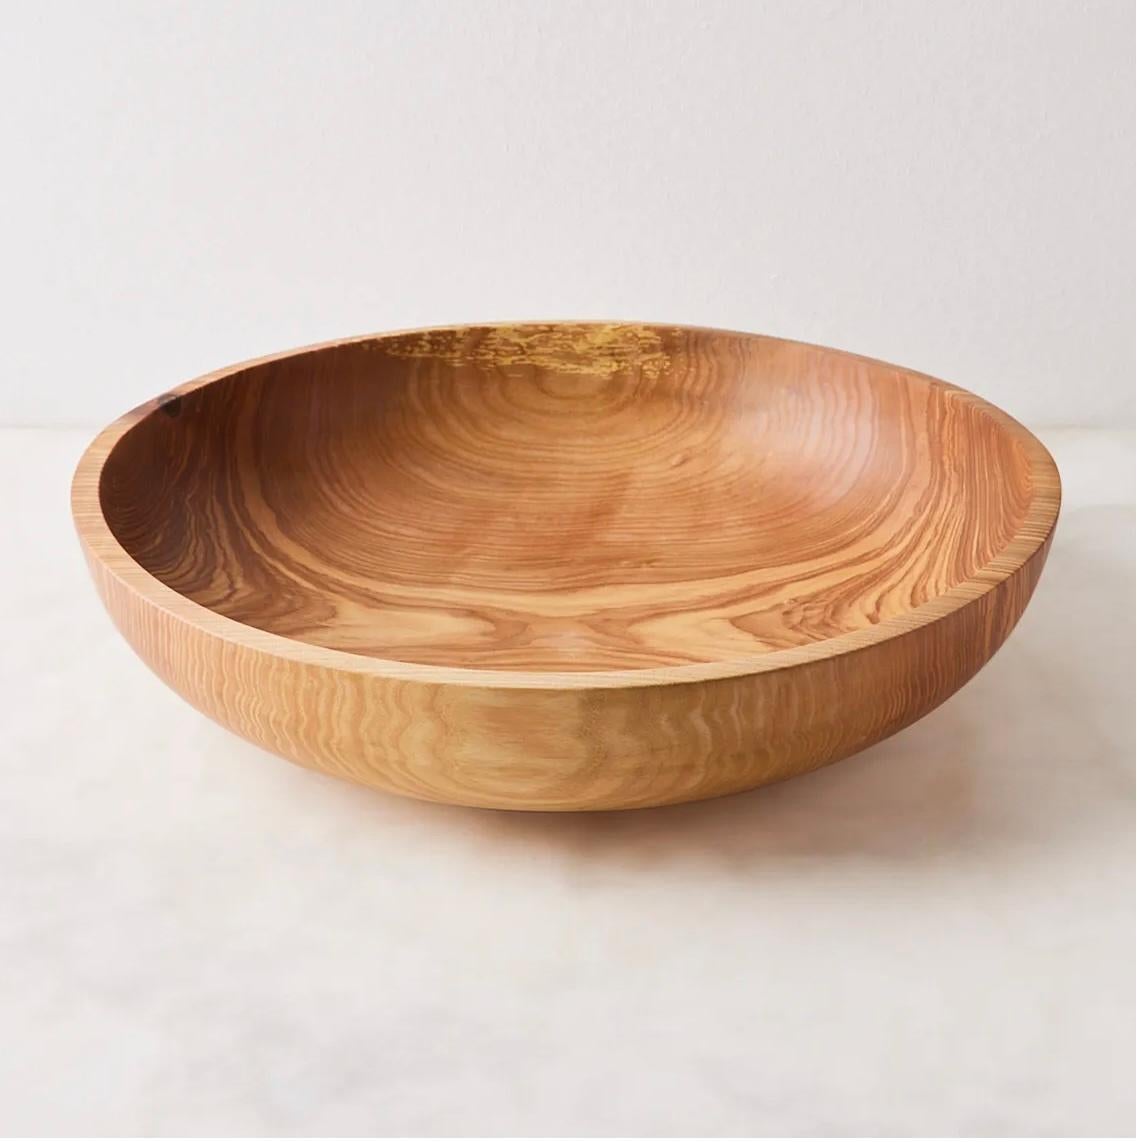 This large wooden bowl is a real showstopper. Hand-carved from a single piece of ash wood, it was made to become a perfect vessel for your dining table. A beautiful color gradient starts with a very light beige shade and goes as far as deep